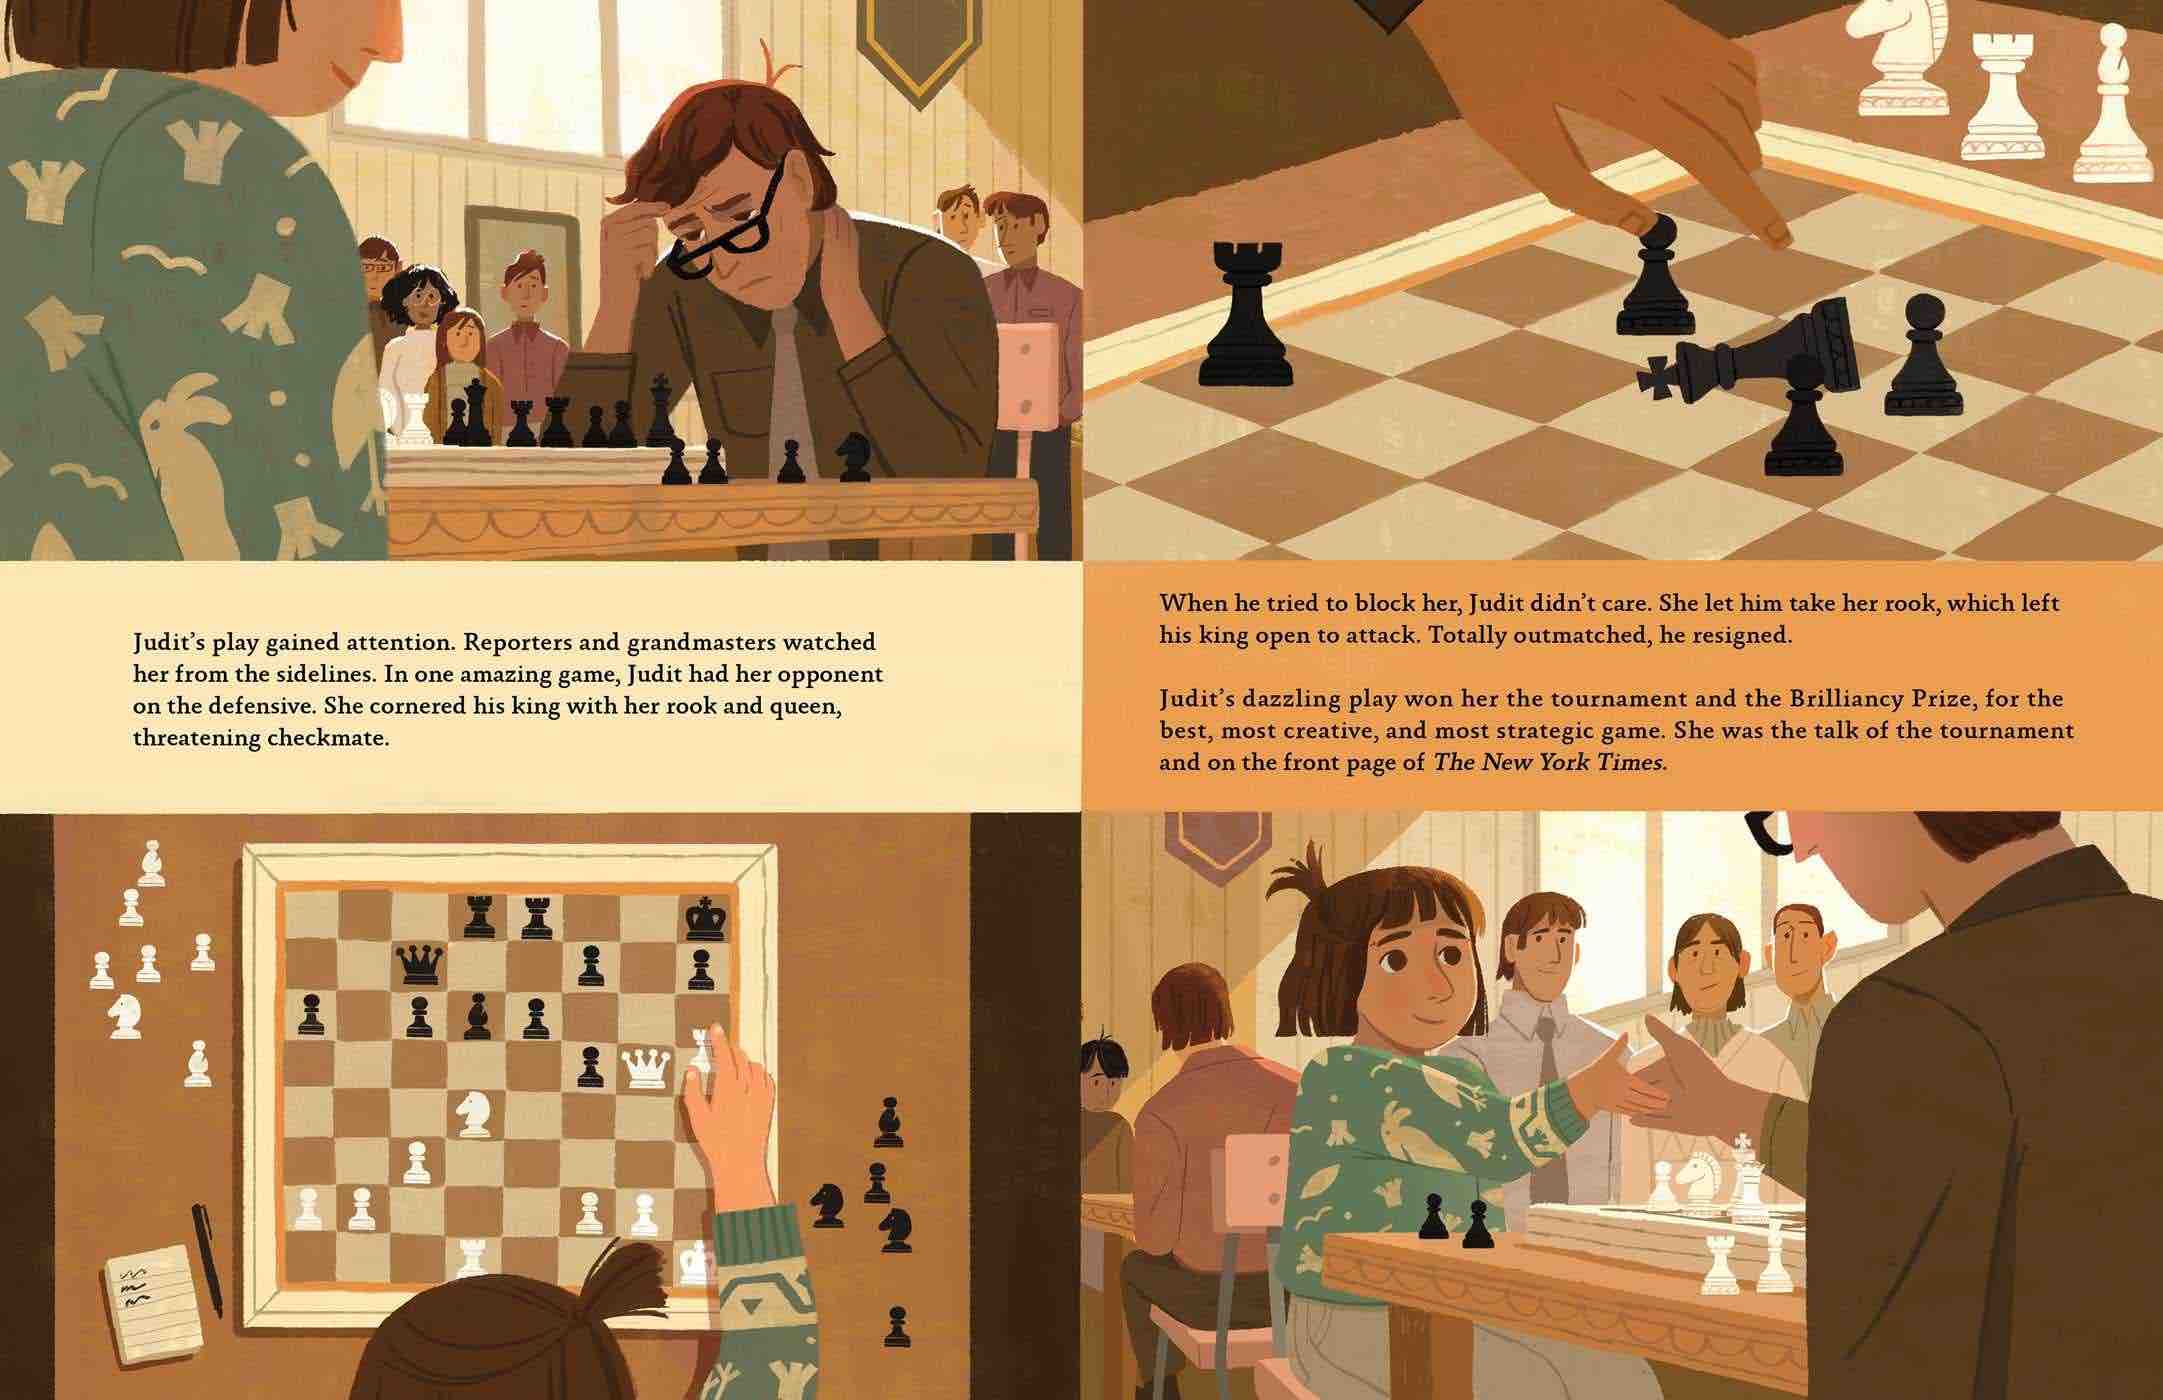 The Queen of Chess is fascinating picture book biography of Judit Polgár